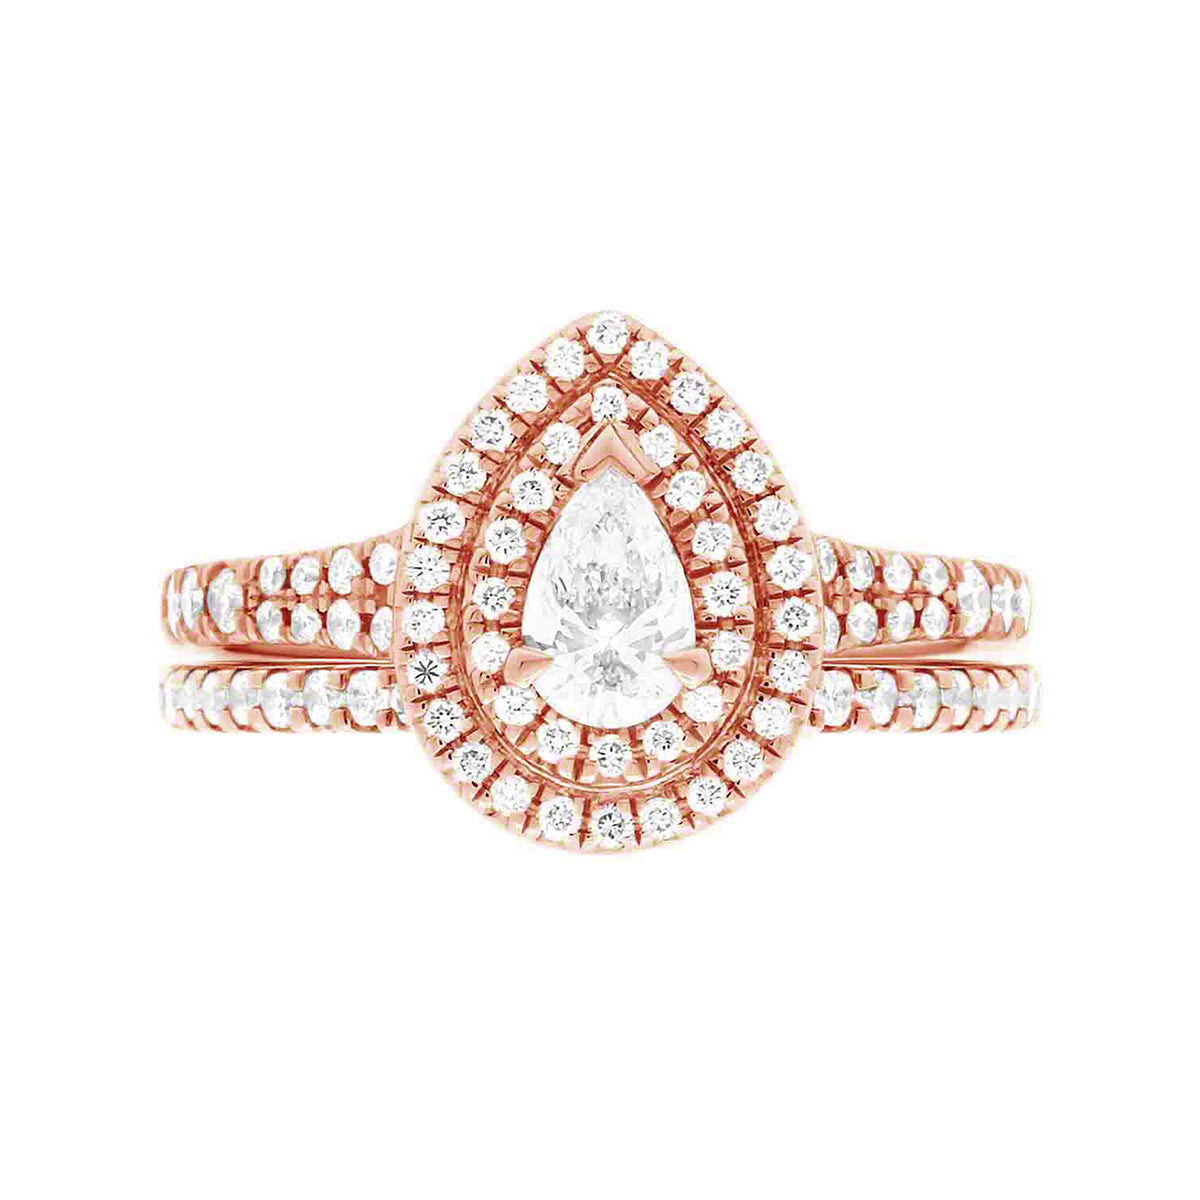 Double Halo Pear Diamond Ring in rose gold pictured with a matching diamond wedding ring